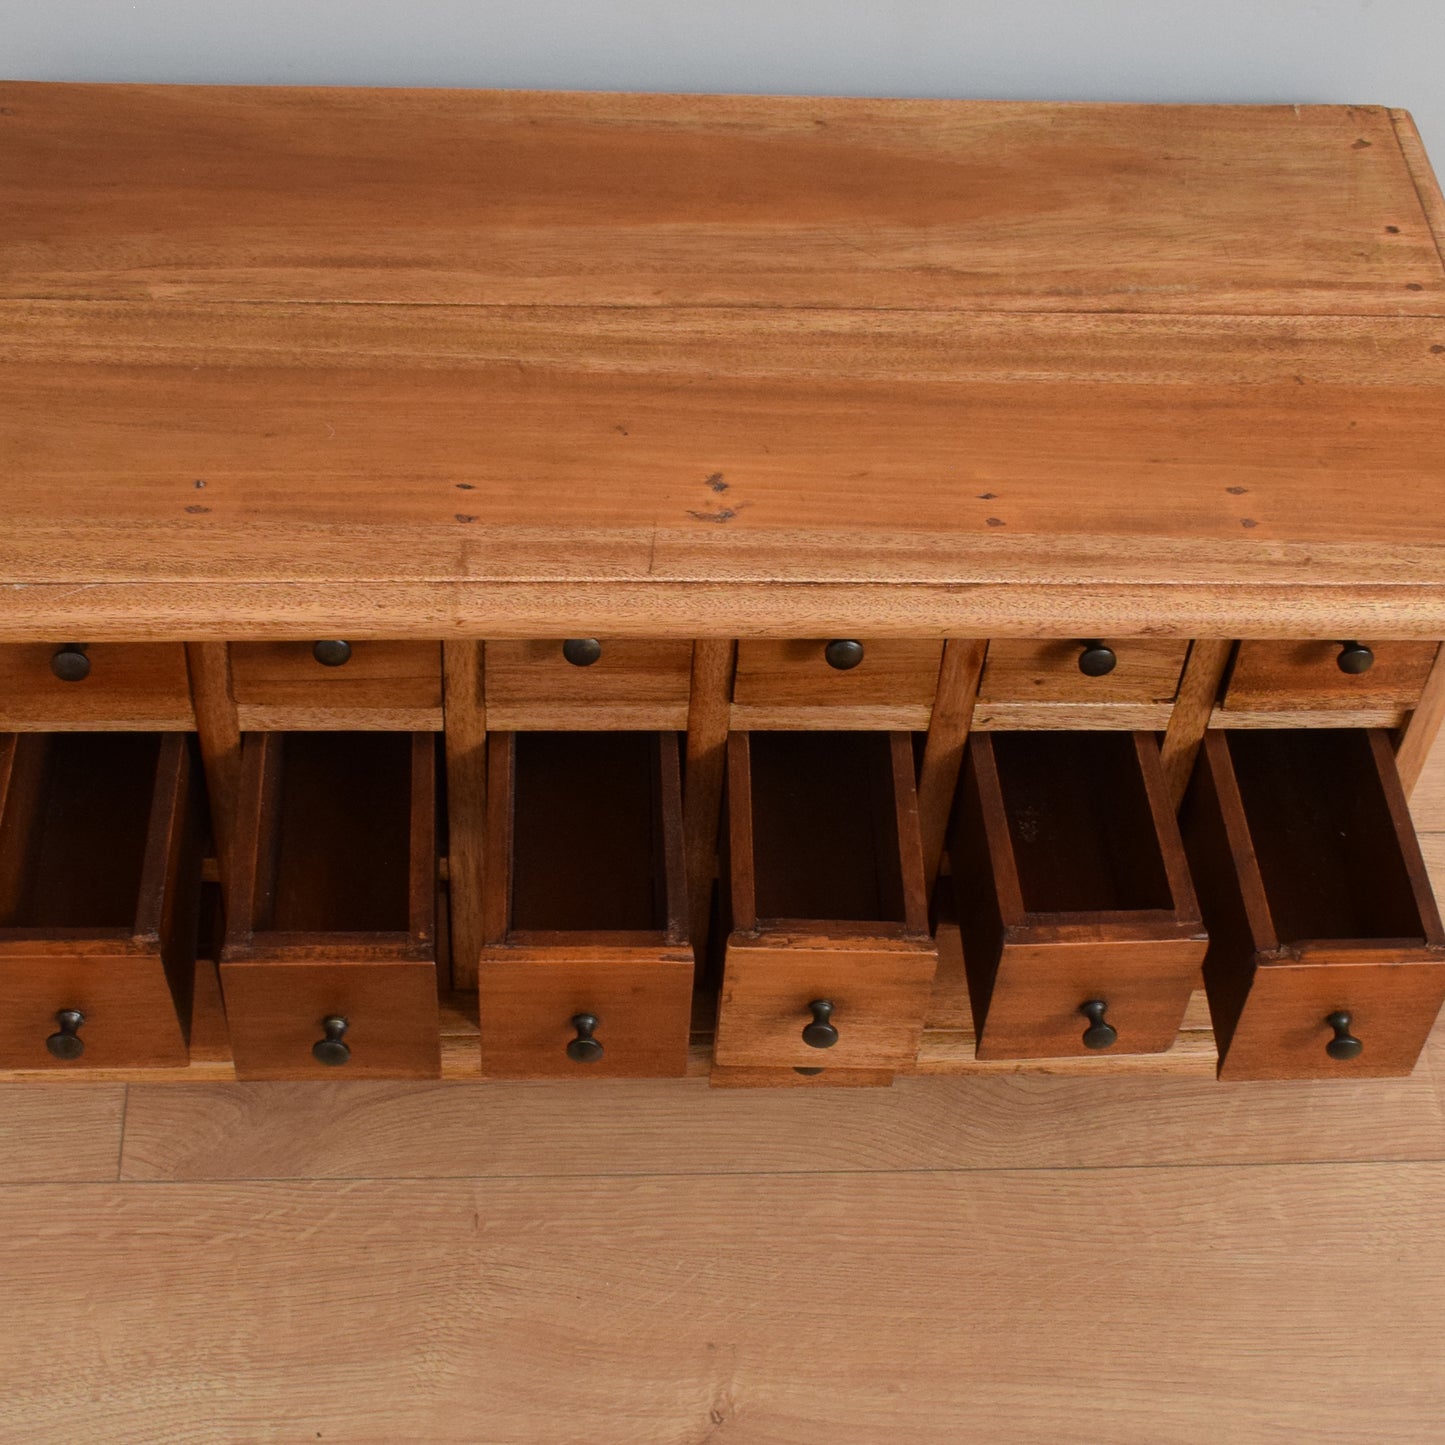 Tabletop Apothecary Chest